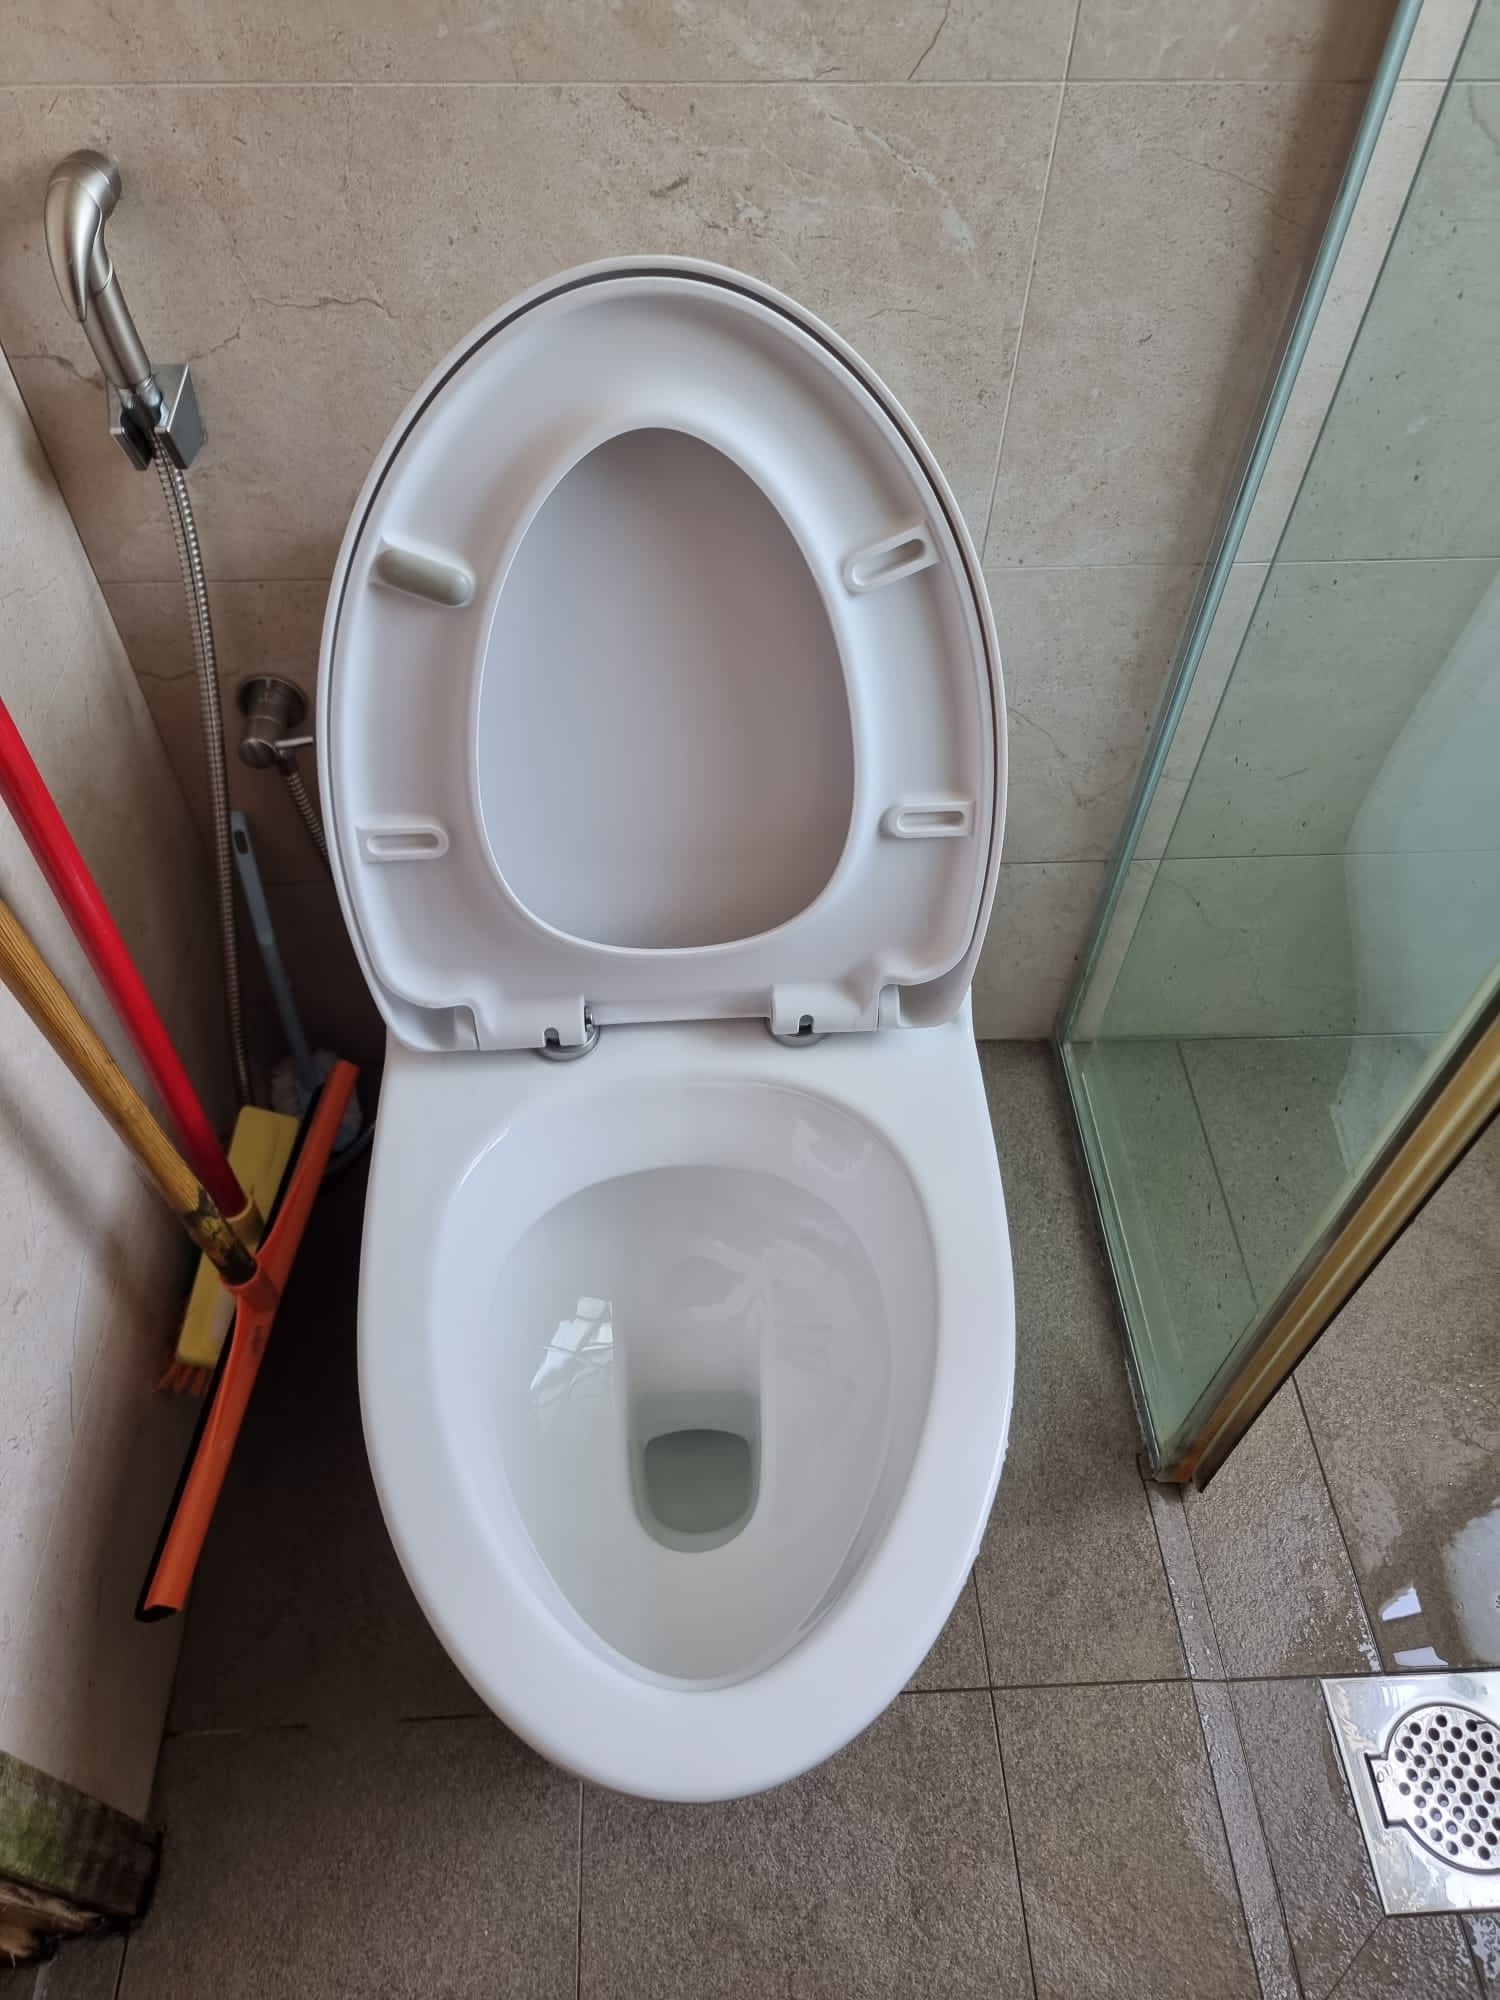 Supply And Replace New Toilet Bowl Cover 3